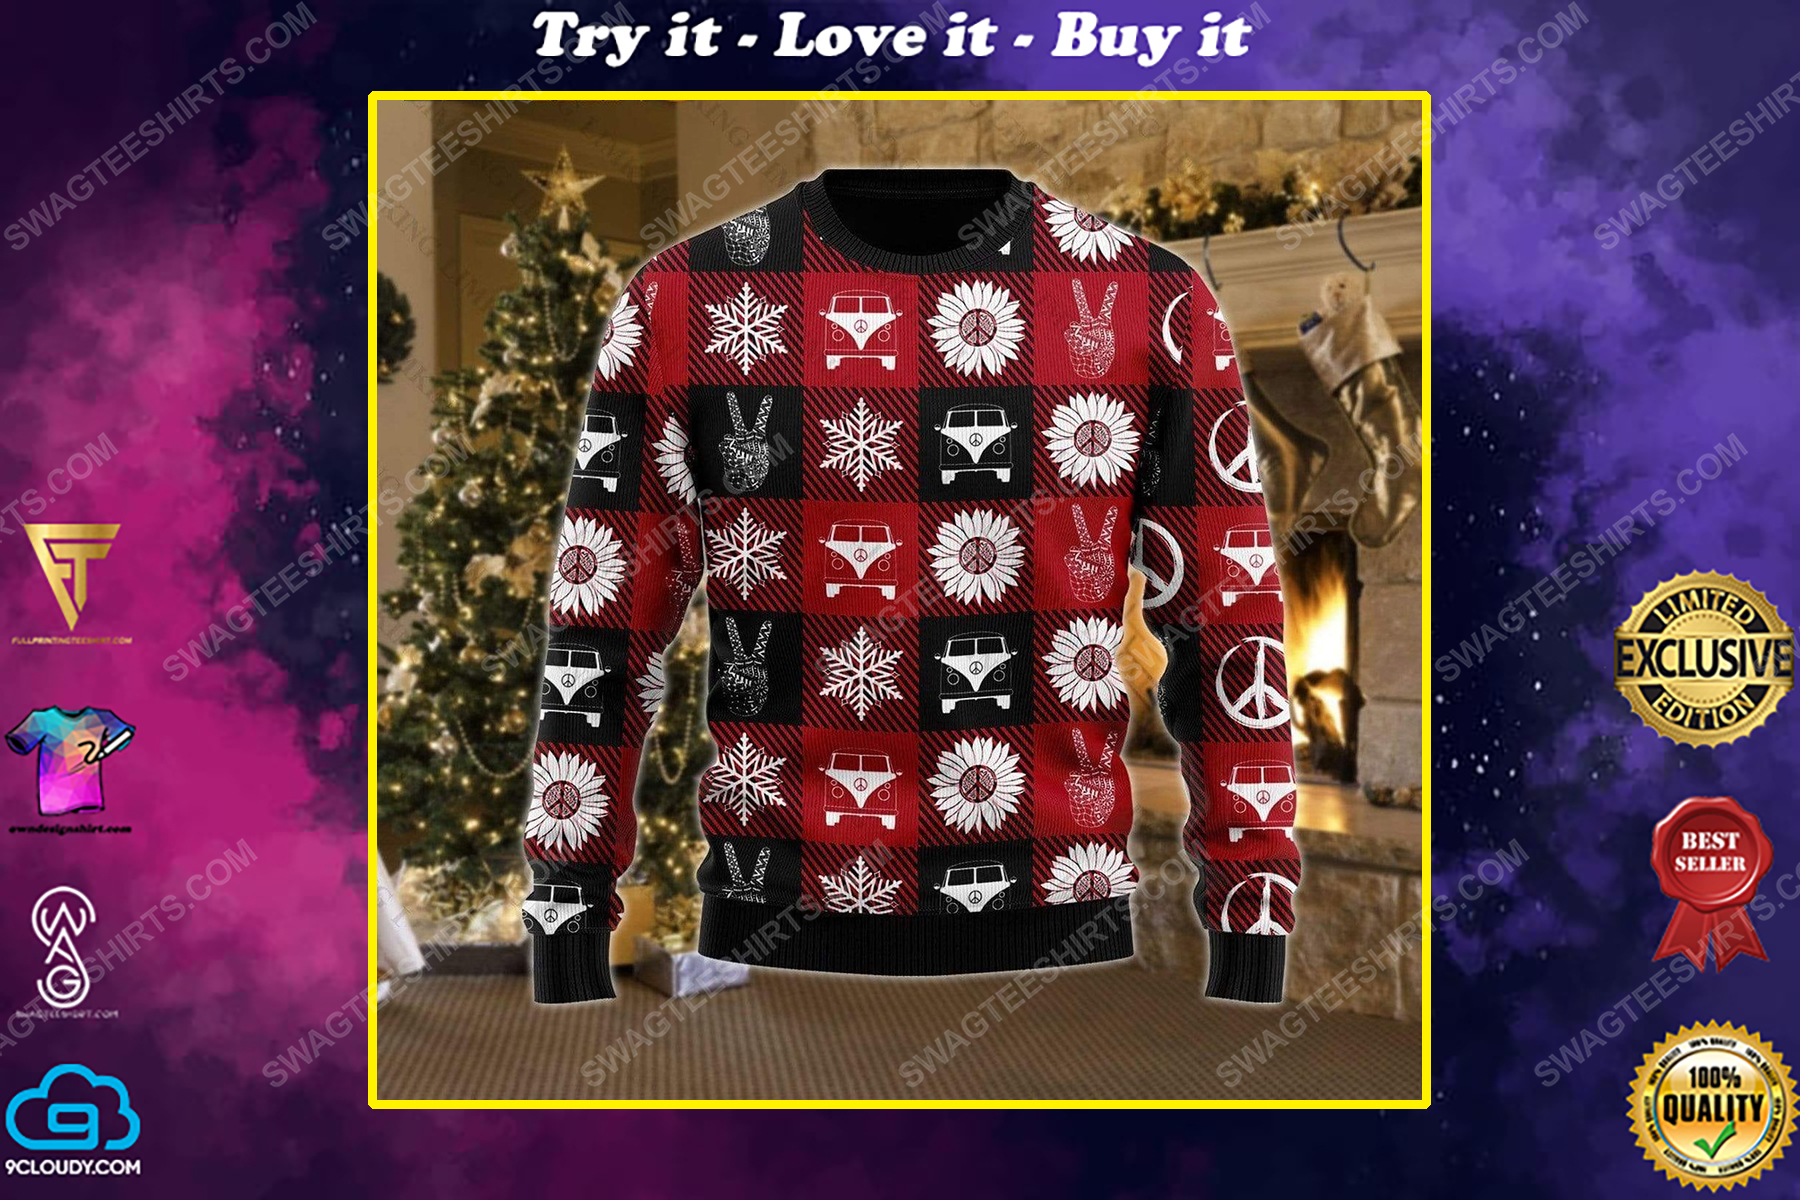 Hippie peace love ugly christmas sweater